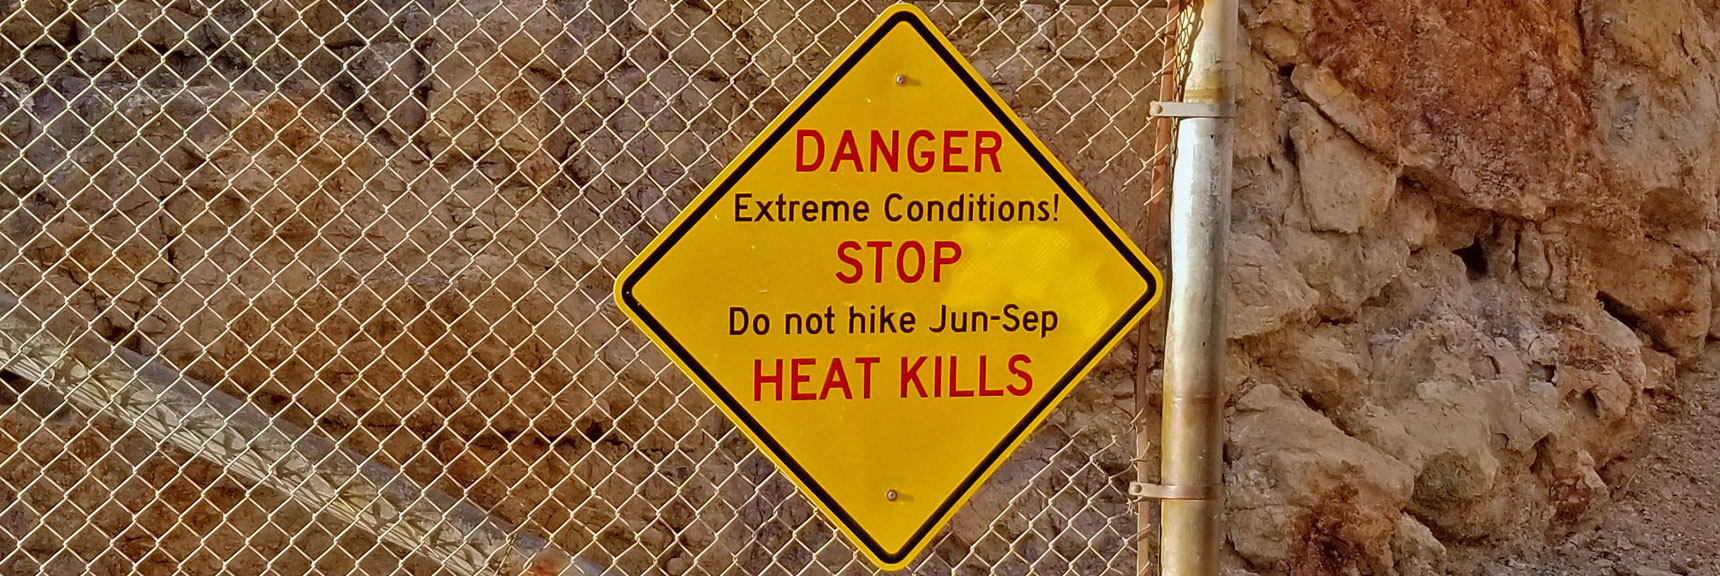 Warning to "Would-be" Summer Hikers | Historic Railroad Trail | Lake Mead National Recreation Area, Nevada